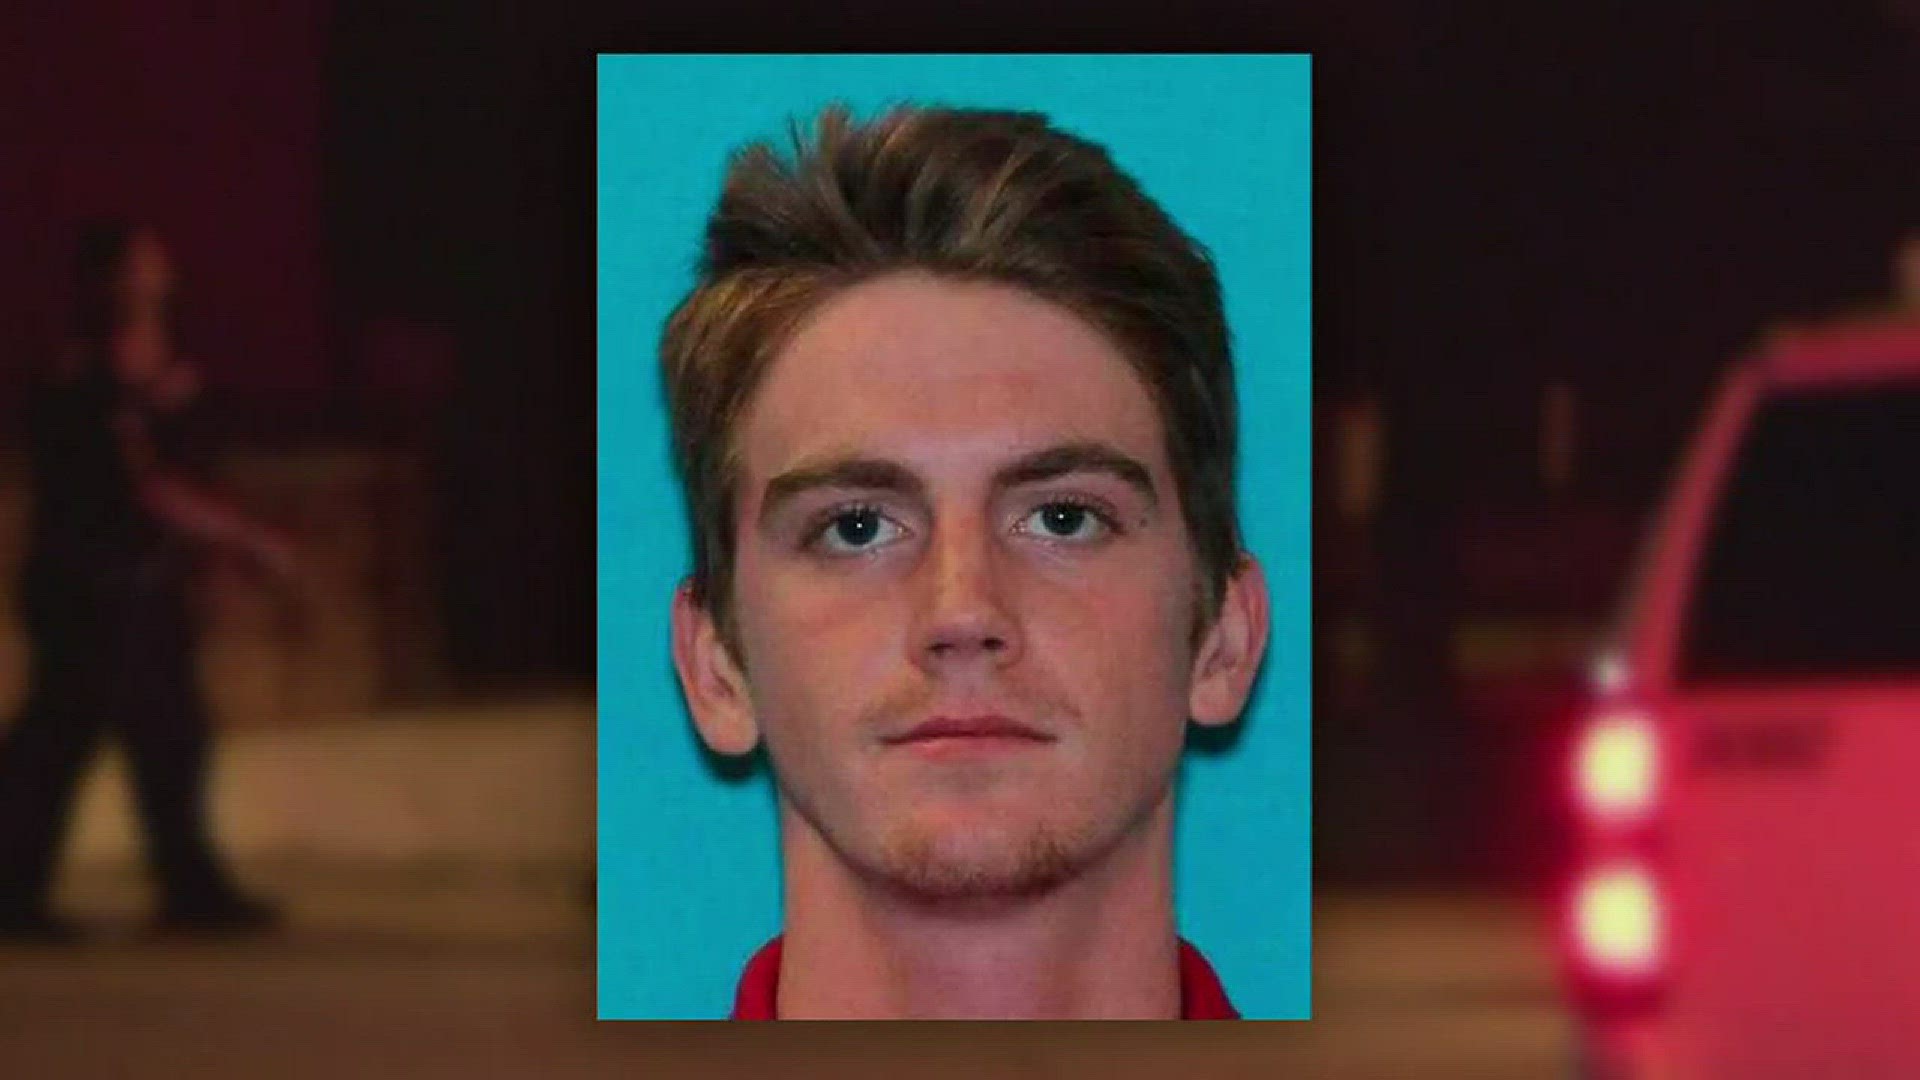 Hollis Daniels, 19, of Seguin has been charged with capital murder in the shooting death of a Texas Tech University police officer.